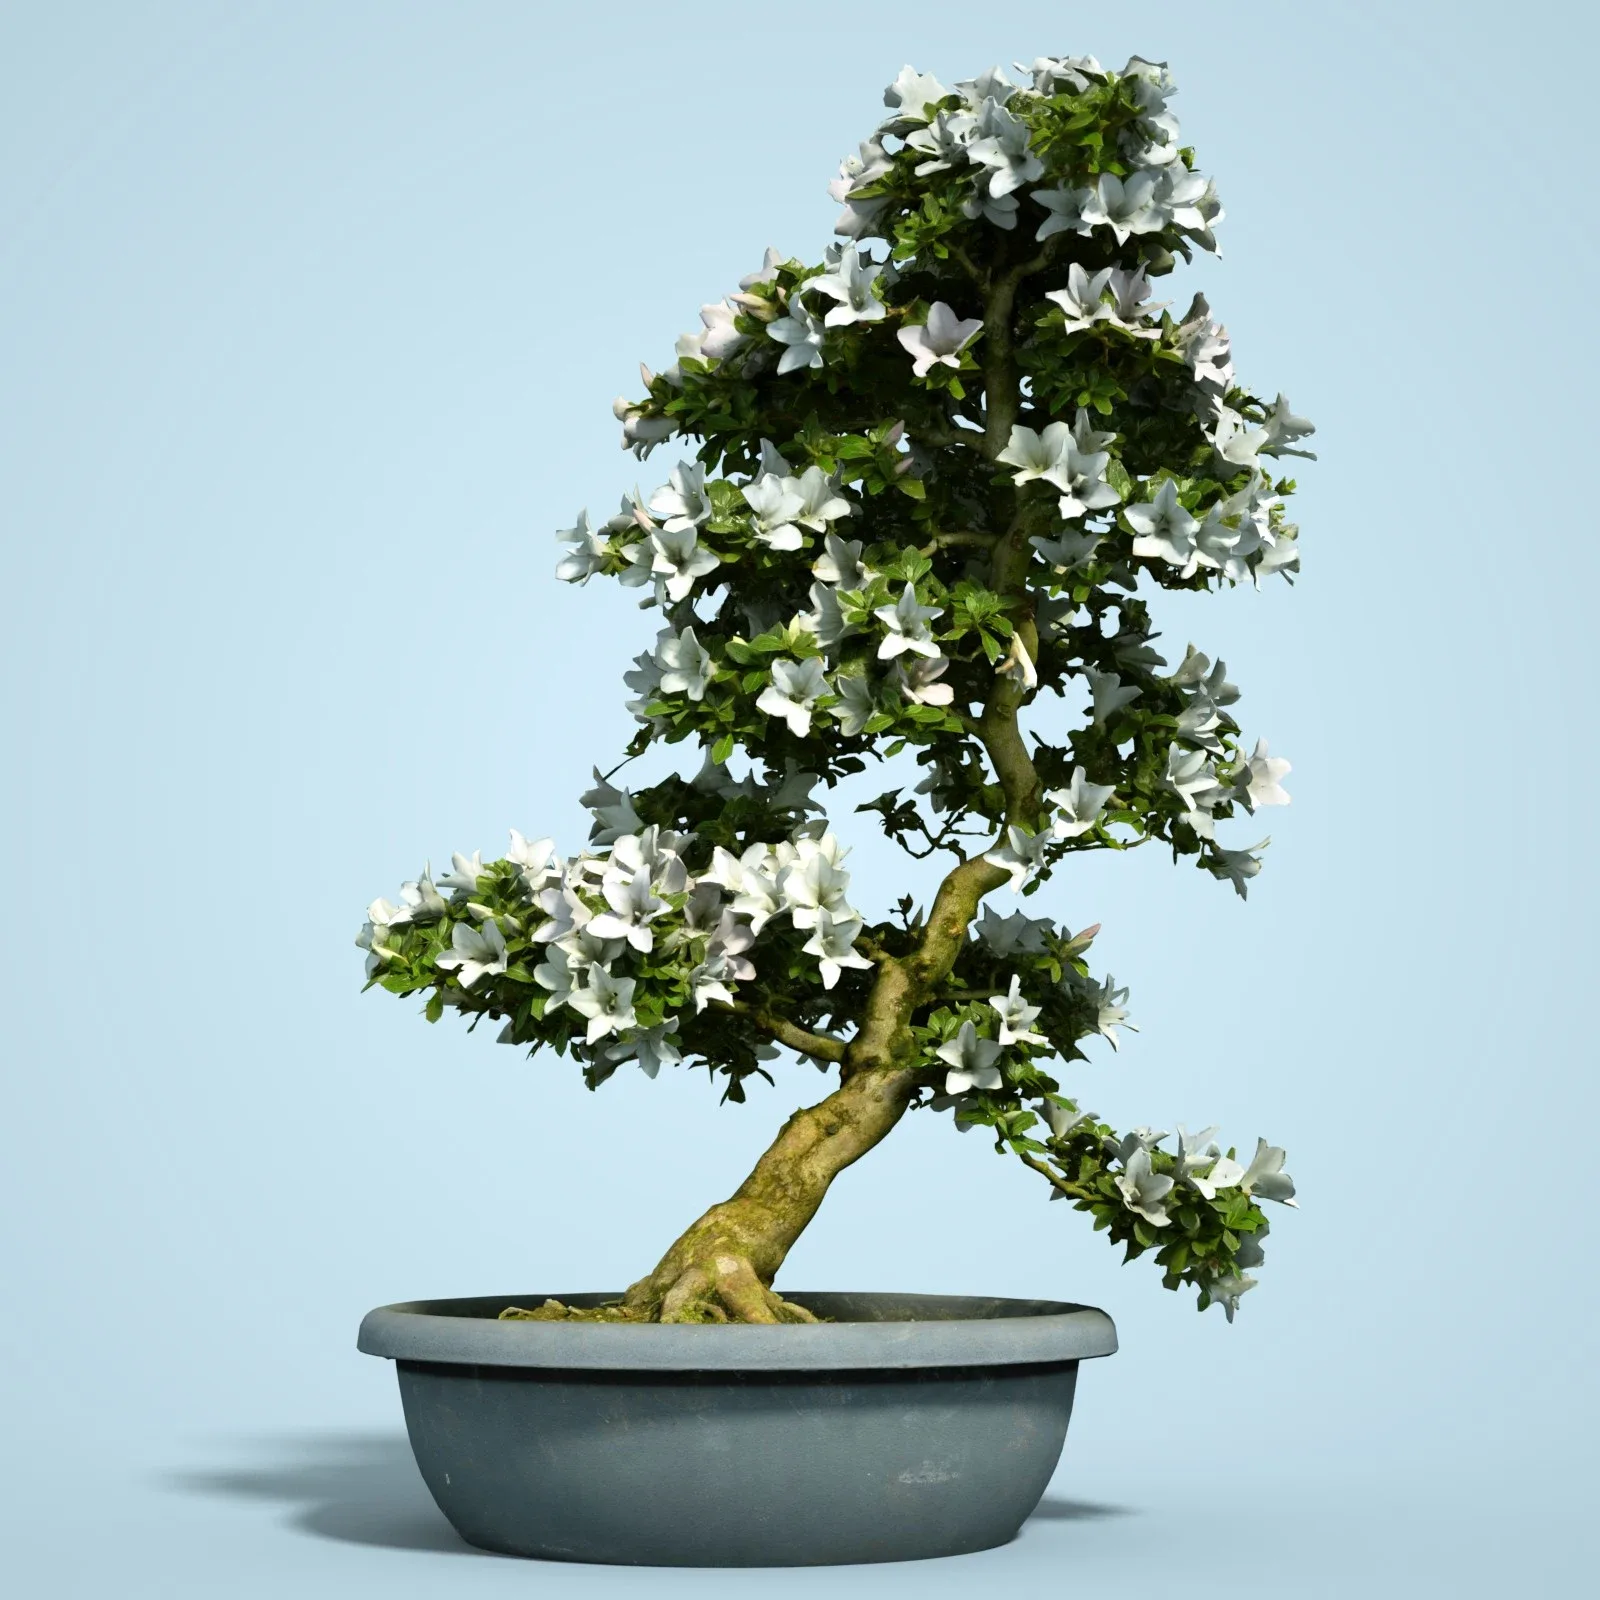 3D Scanned Blossoming Satsuki Bonsai Tree Collection